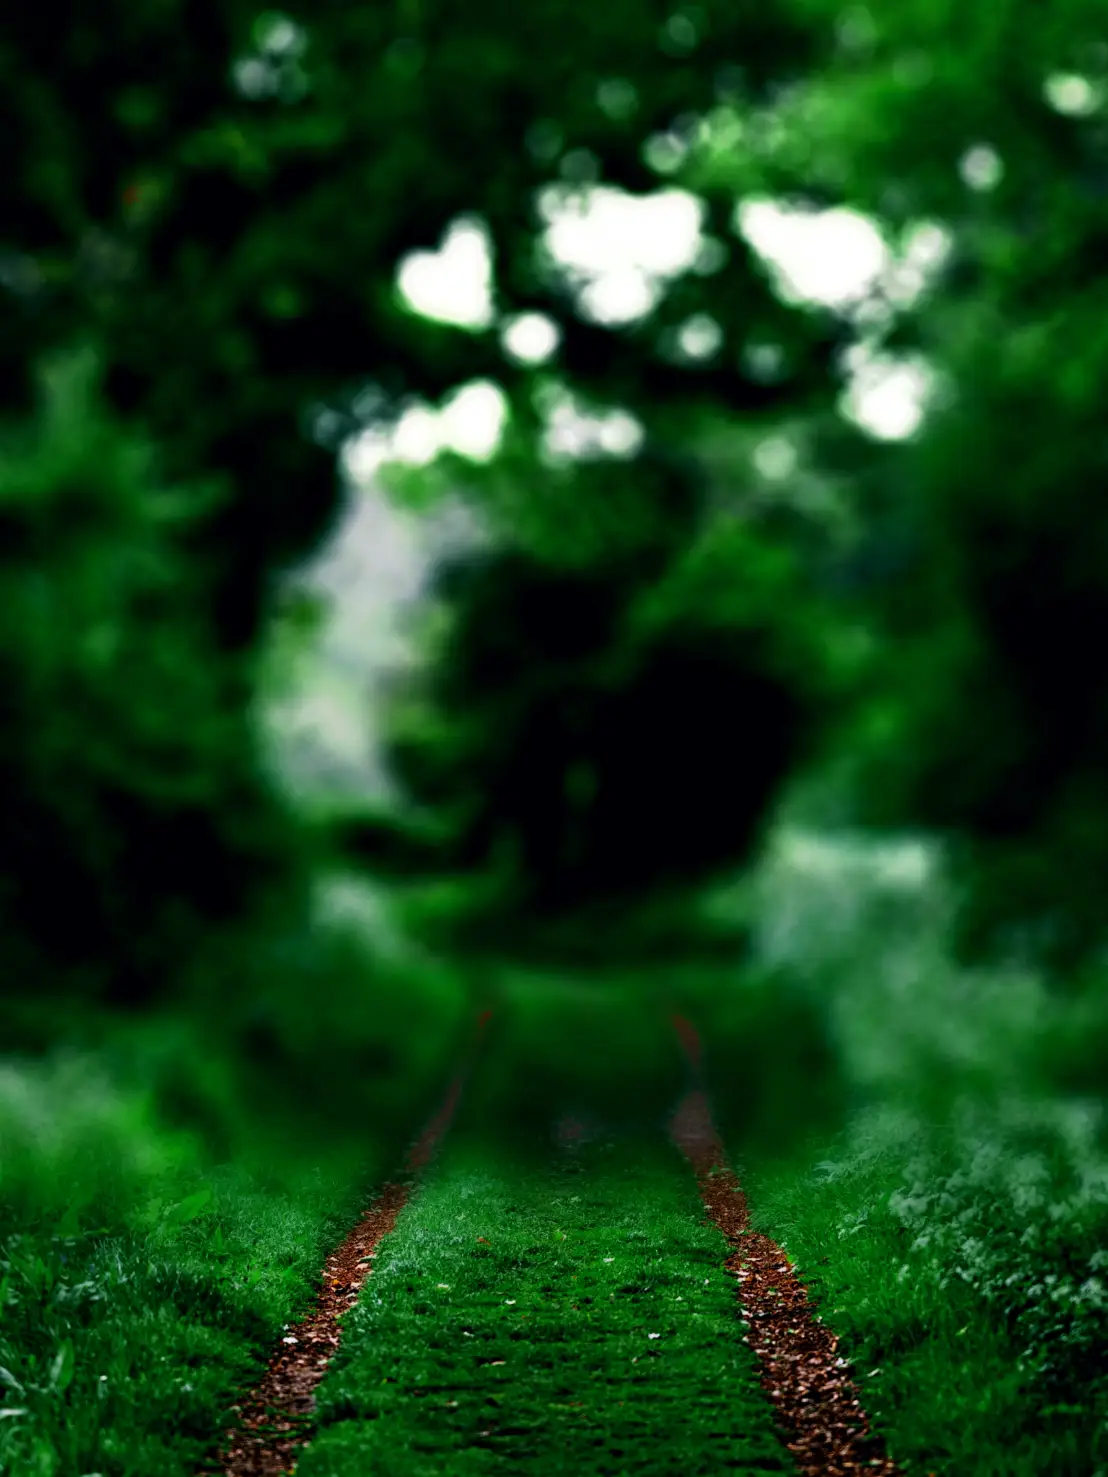 You are currently viewing Dark green cb blur background full hd download